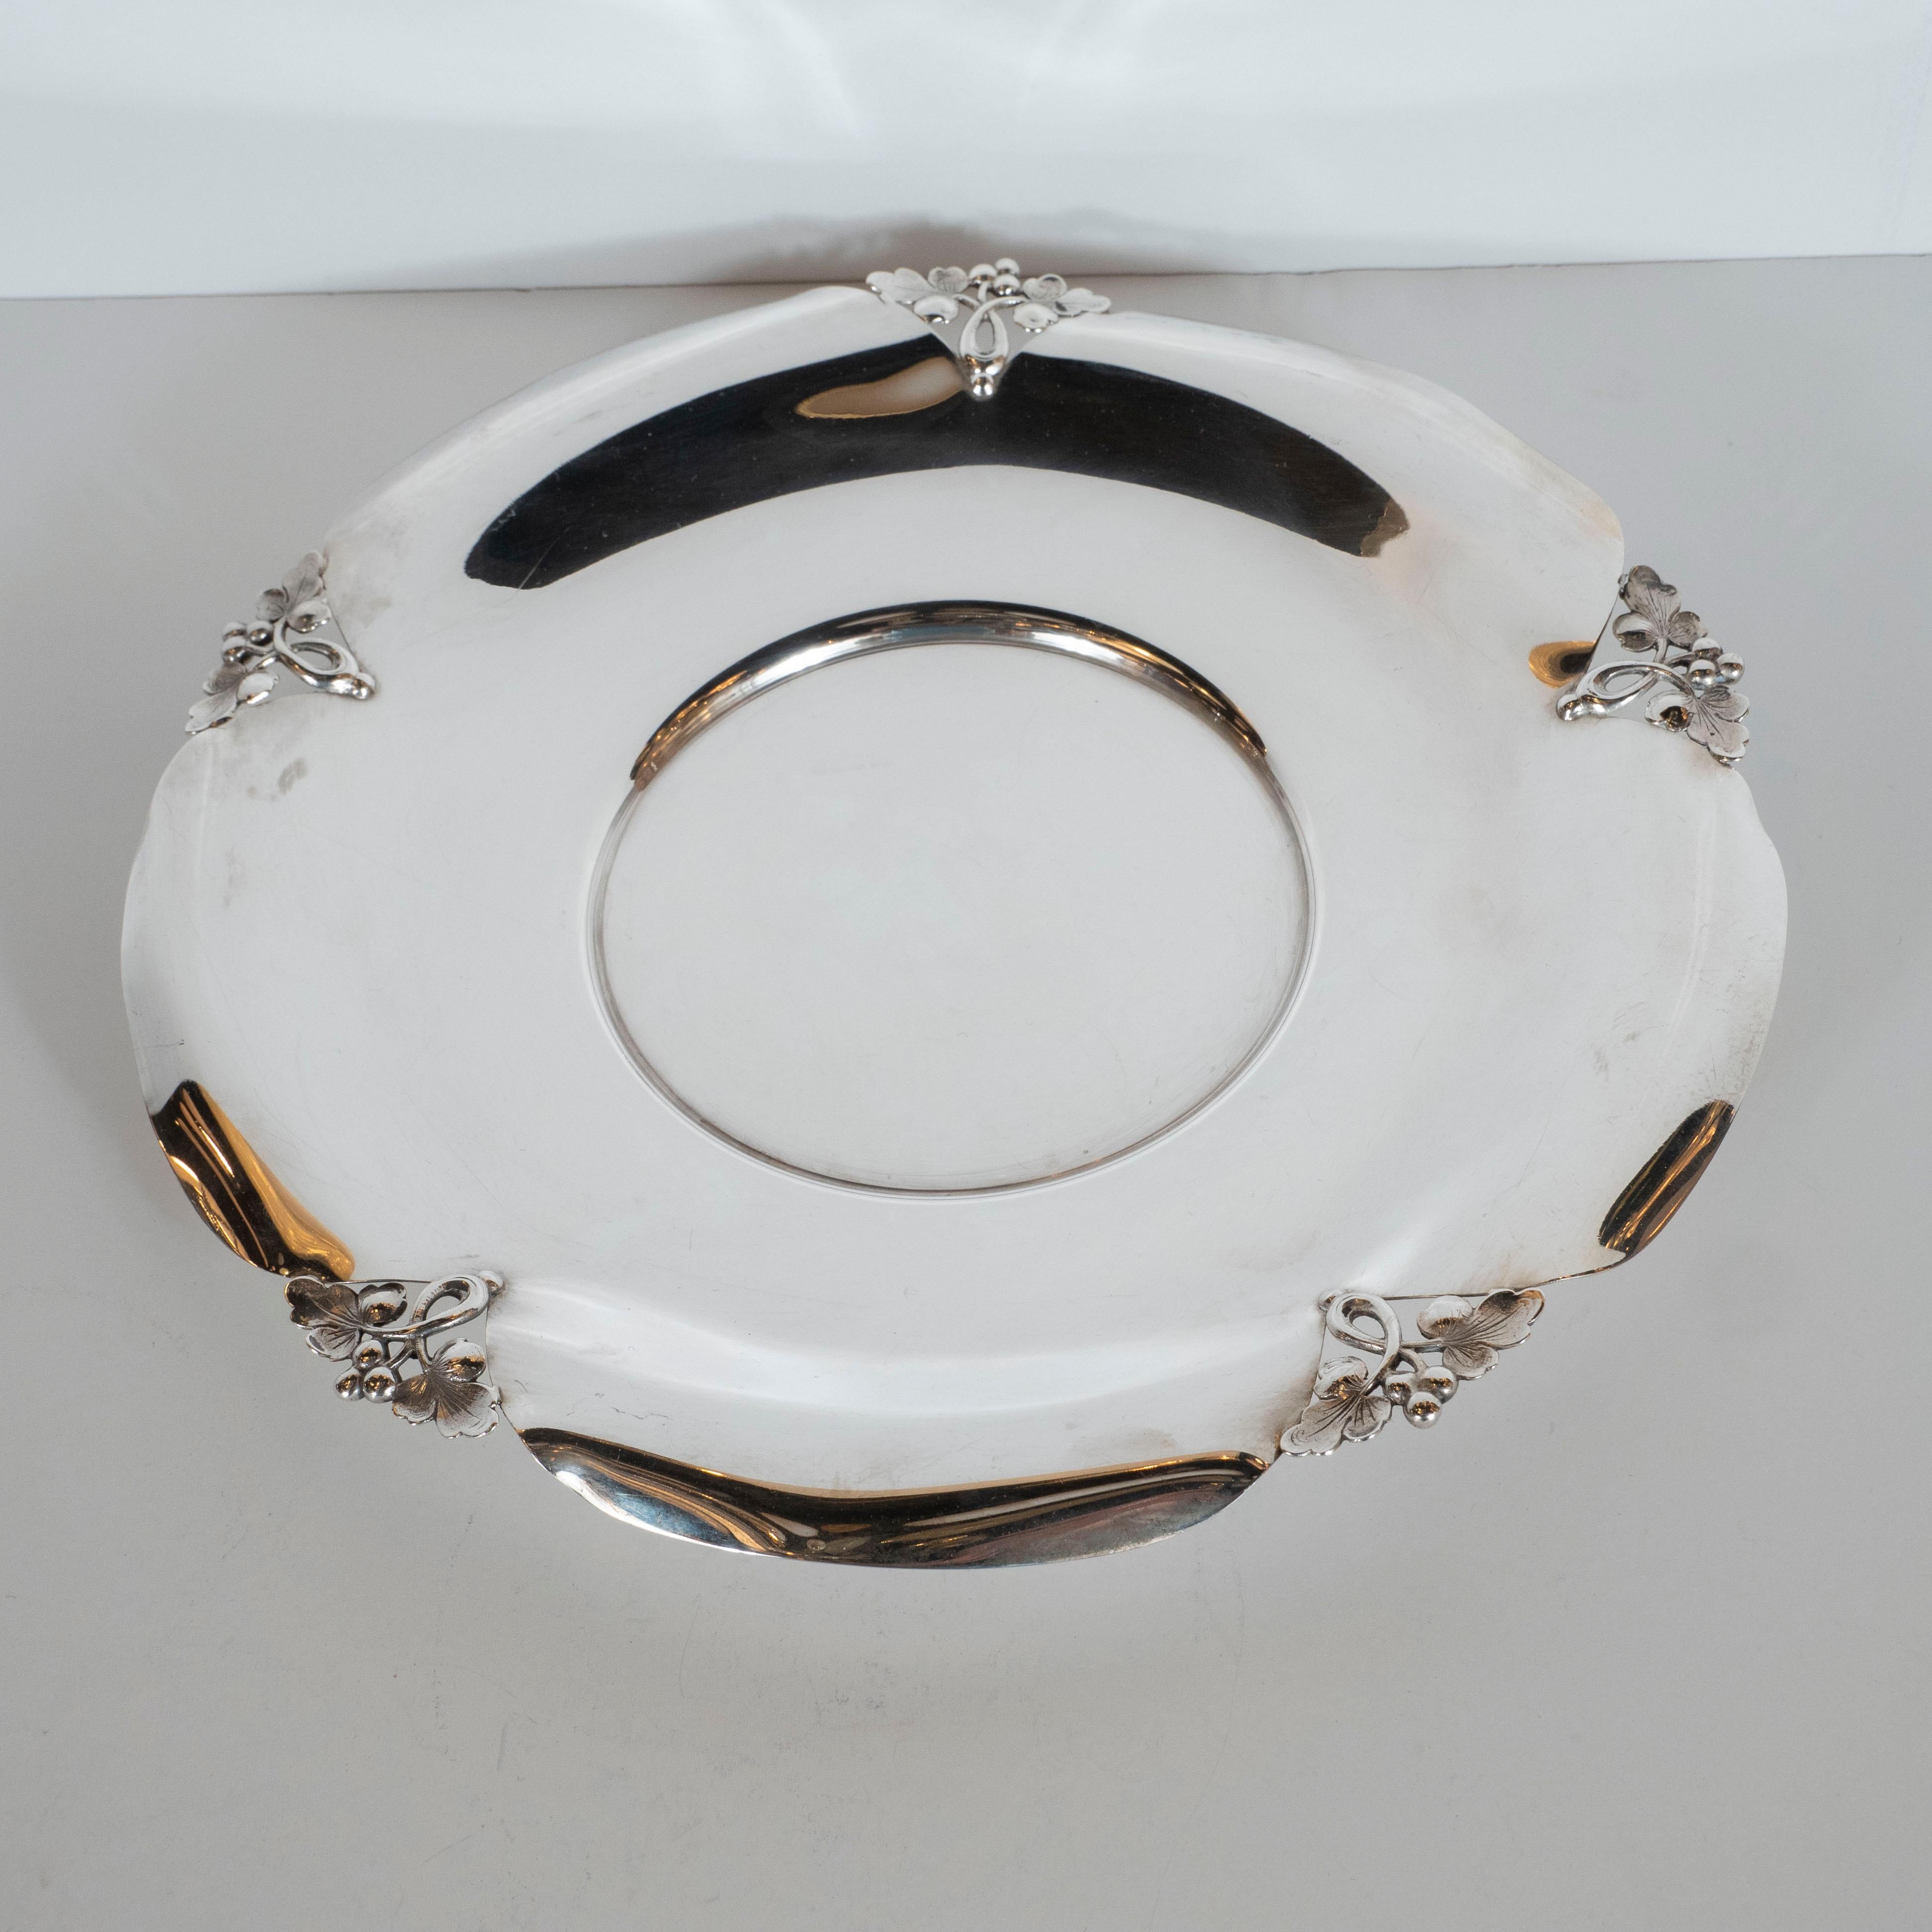 This stunning Art Deco decorative tray was realized by the Philadelphia based fabled American jeweler and producer of fine luxury silver goods, James Emmot Caldwell, since 1839. It features a circular body with concentric circular insets, fitted